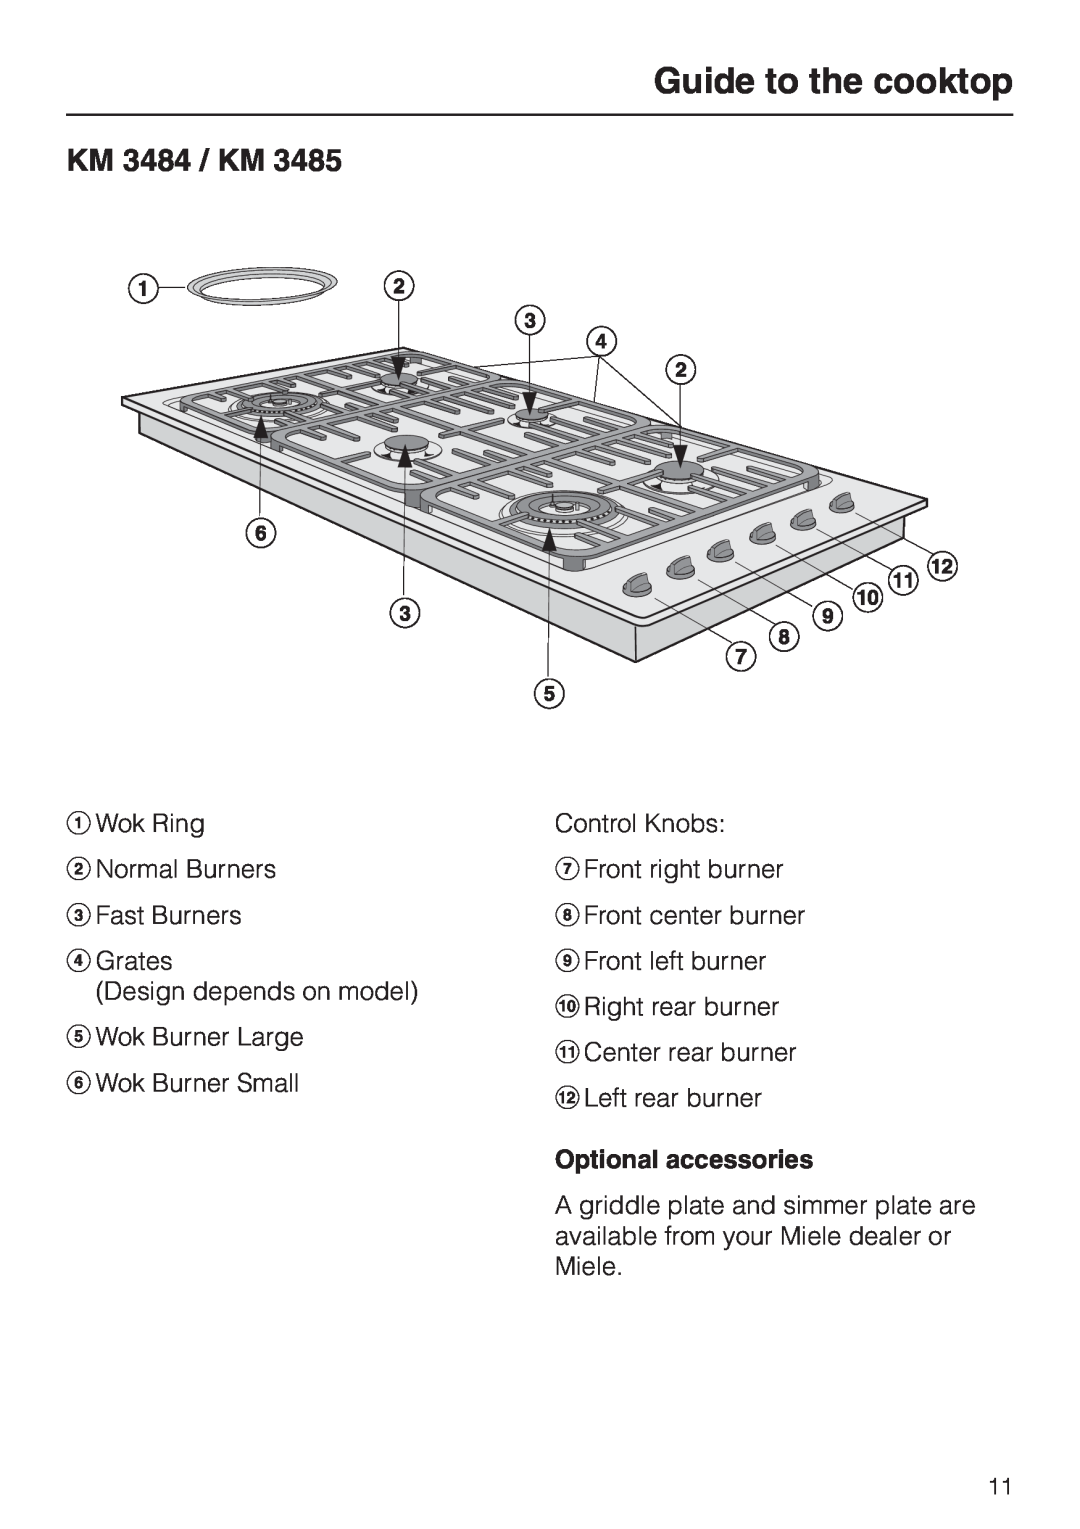 Miele KM 3464, KM 3475, KM 3465 installation instructions KM 3484 / KM, Guide to the cooktop, Optional accessories 